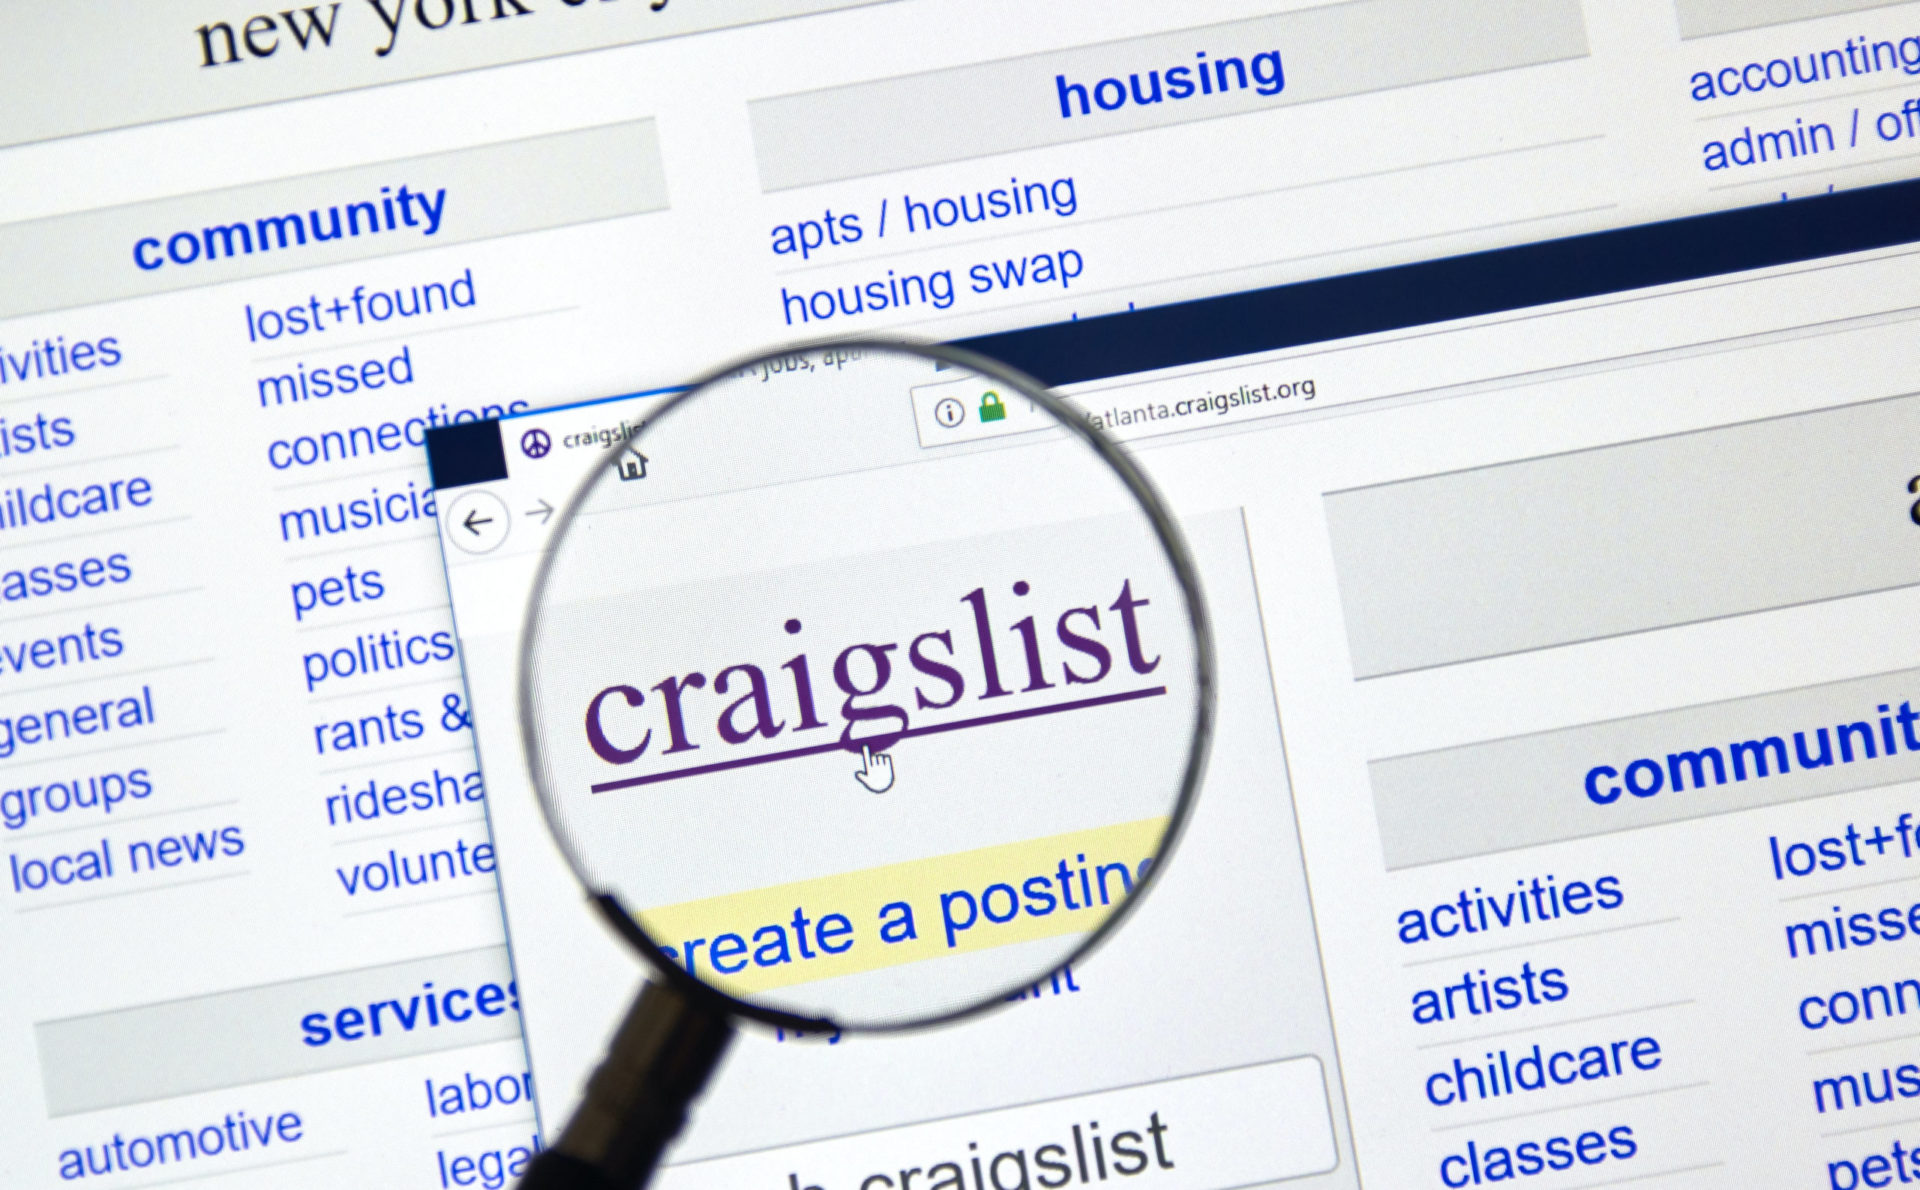 A magnified view of the Craigslist website, focusing on its logo and the "create a posting" option, with categories like community, housing, and jobs visible in the background.